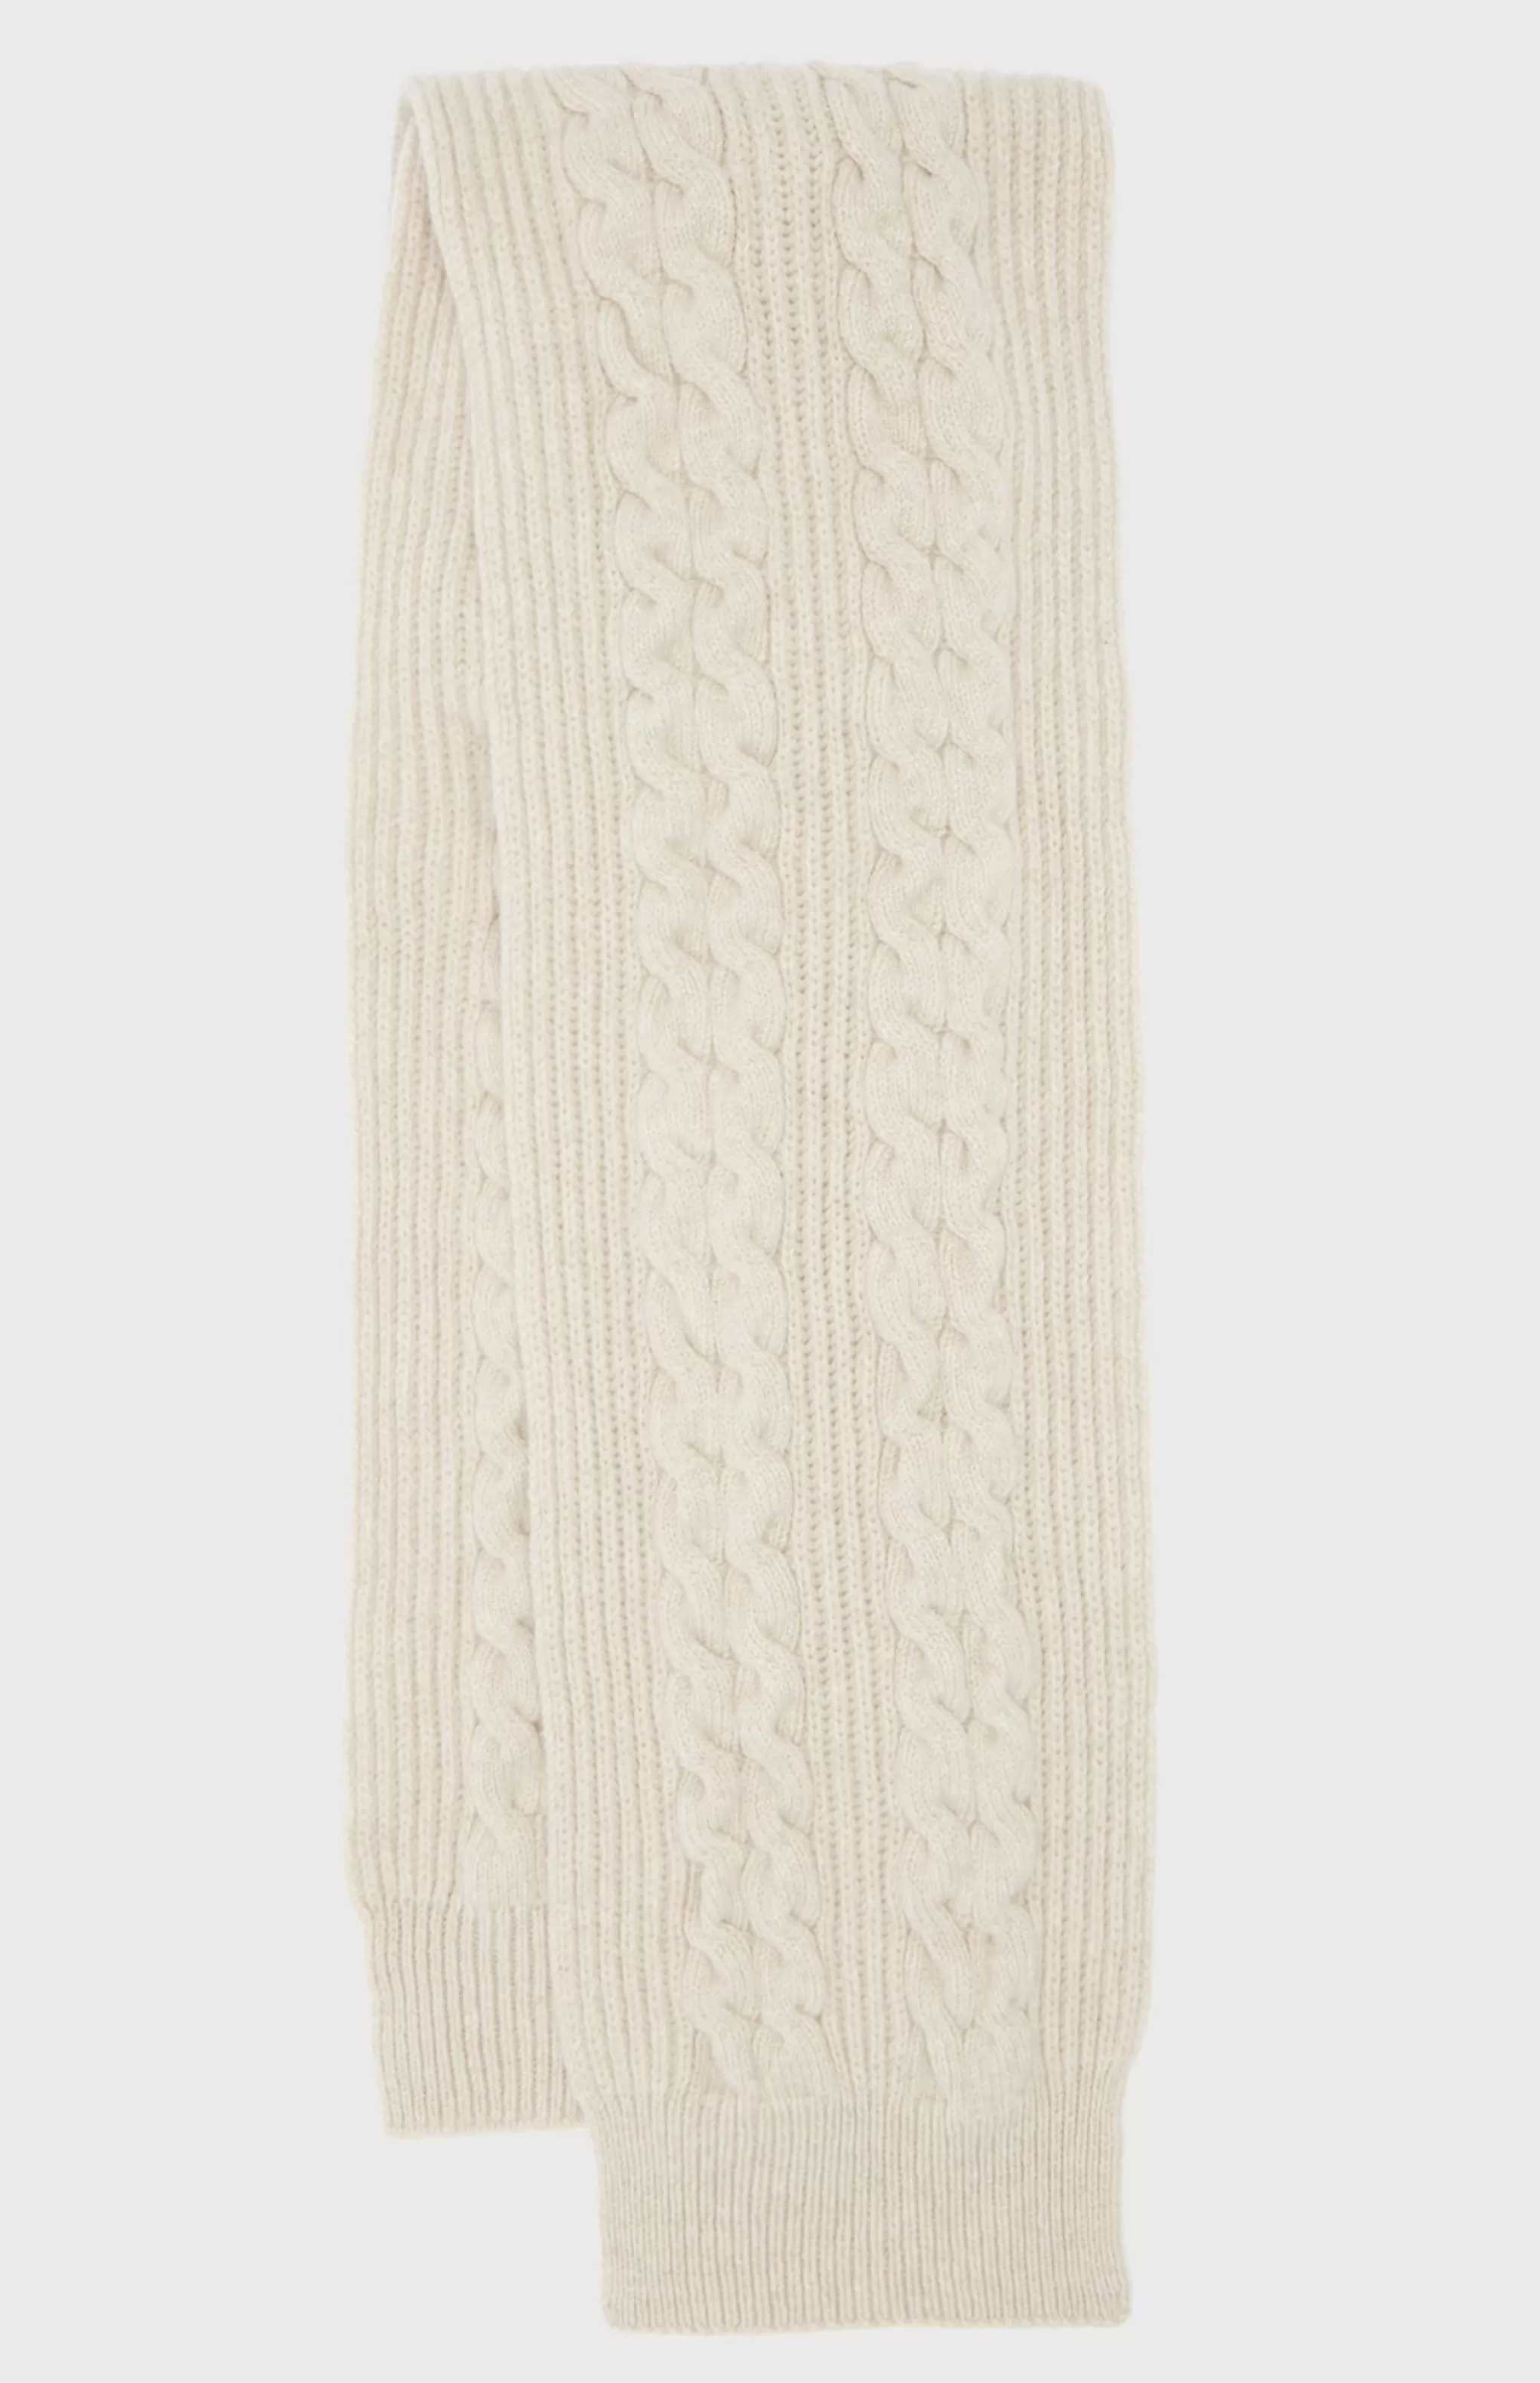 Best All Over Rib And Cable Detail Scarf In Light Oatmeal Men/Women Made in Scotland